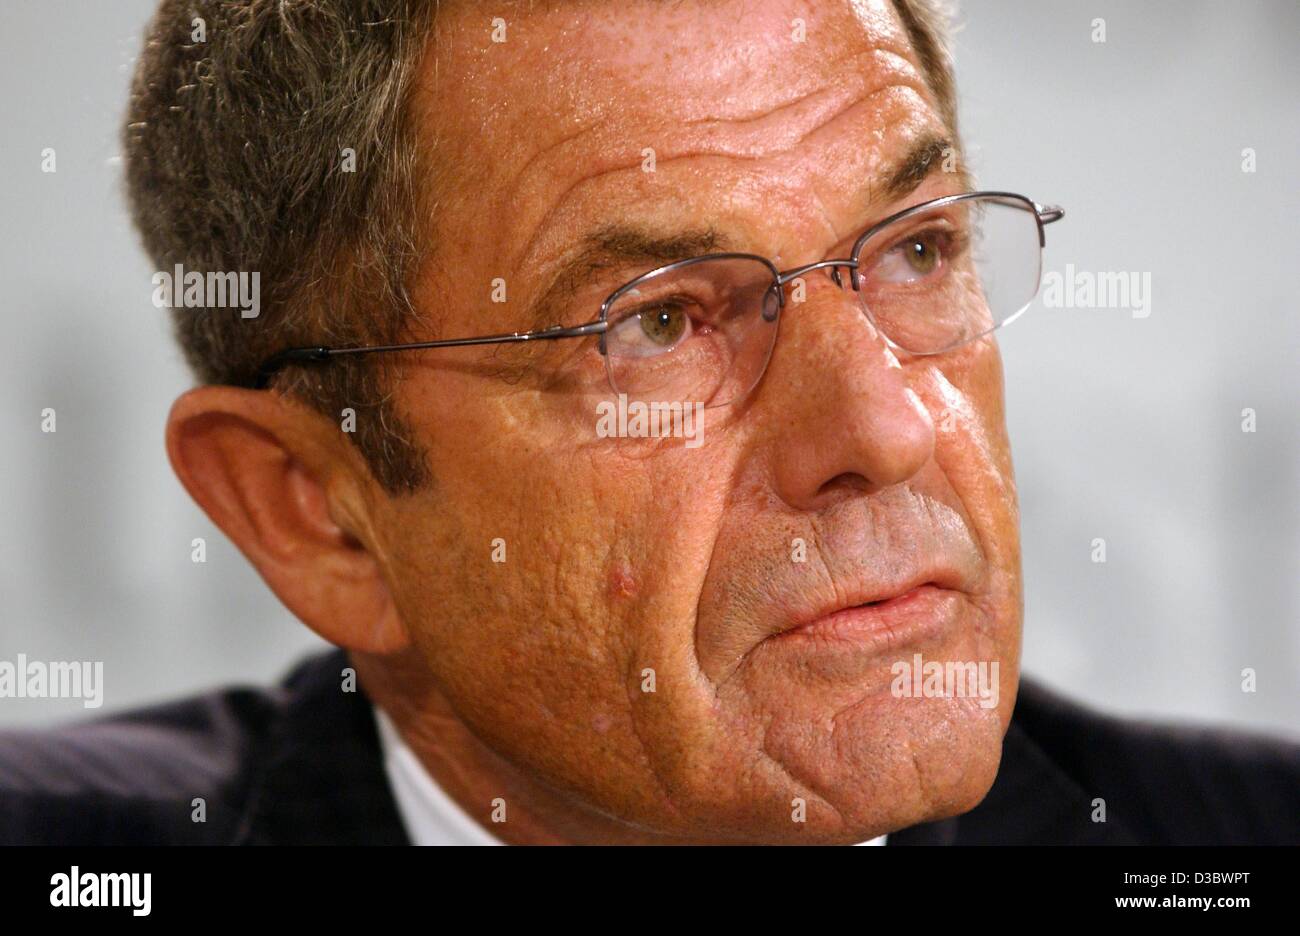 (dpa) - Josef Brauner, CEO of the telephone network provider T-Com, a subsidiary of the German Telekom, pictured during a press conference at the Internationale Funkausstellung (international radio exhibition) in Berlin, 27 August 2003. The writing reads 'einfach magisch' (simply magical). T-Com has Stock Photo